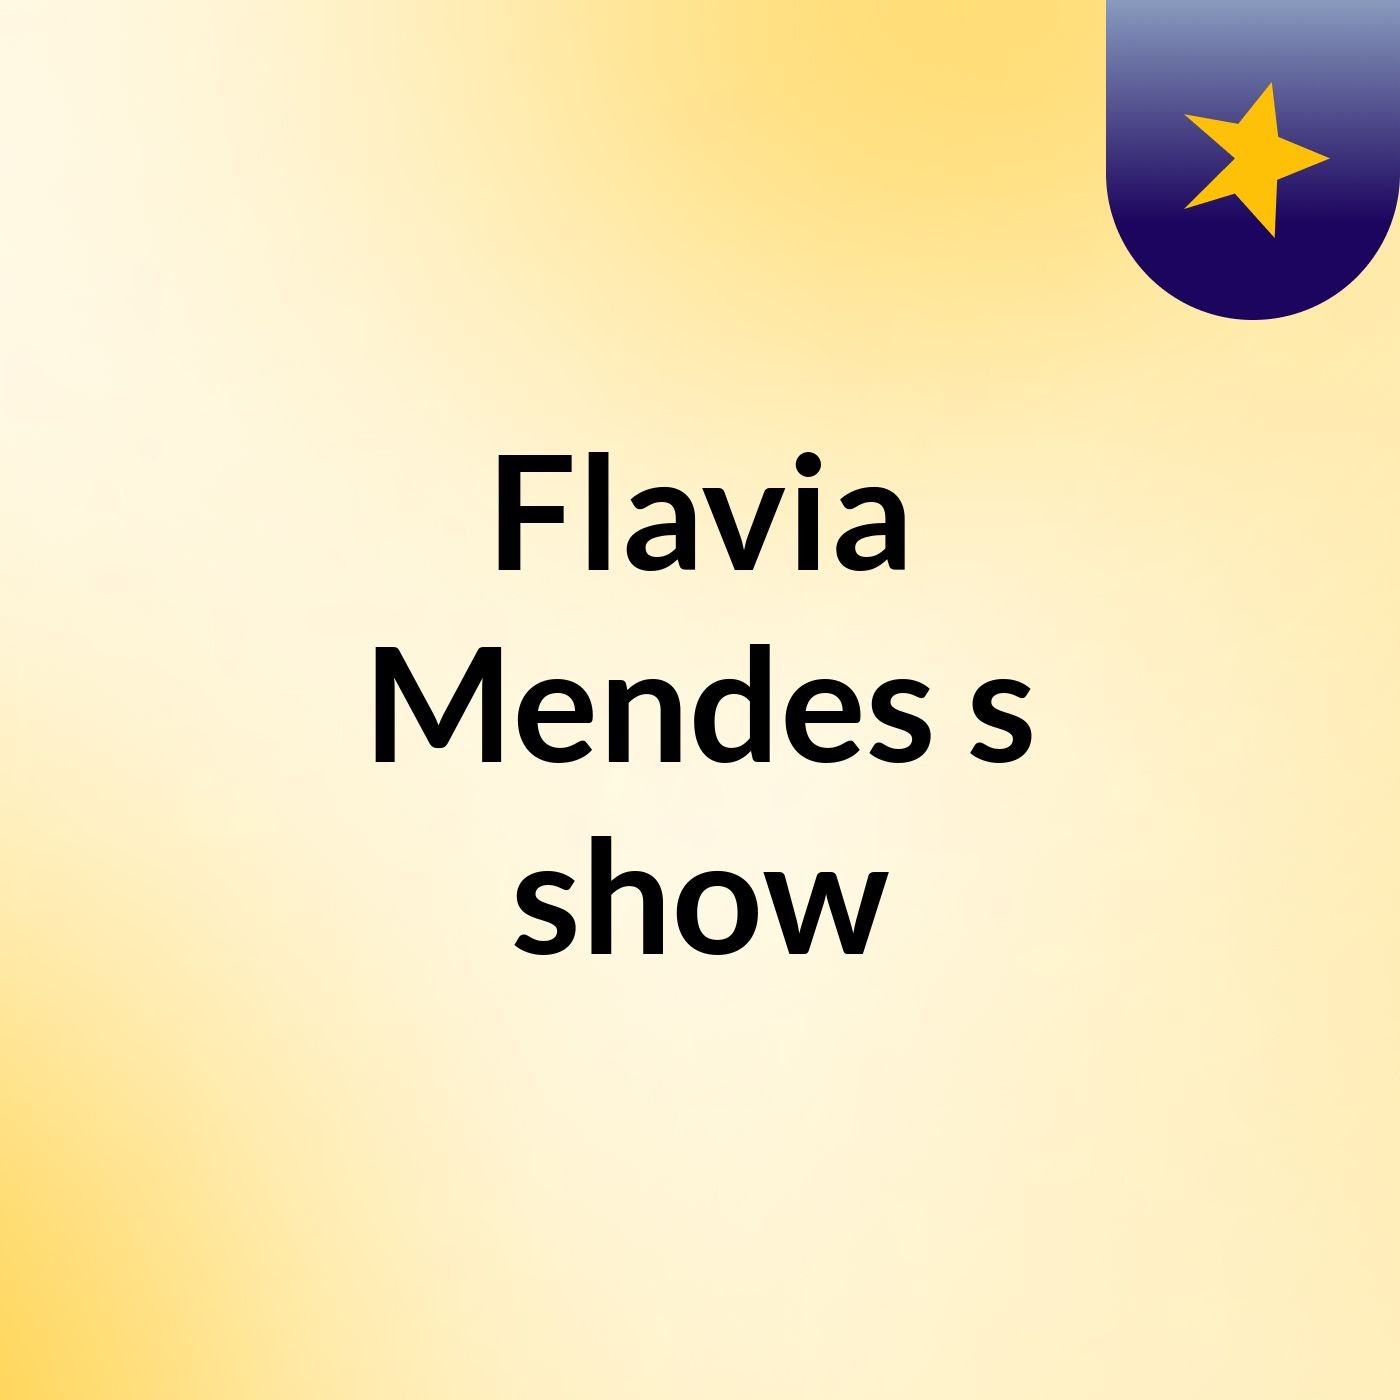 Flavia Mendes's show